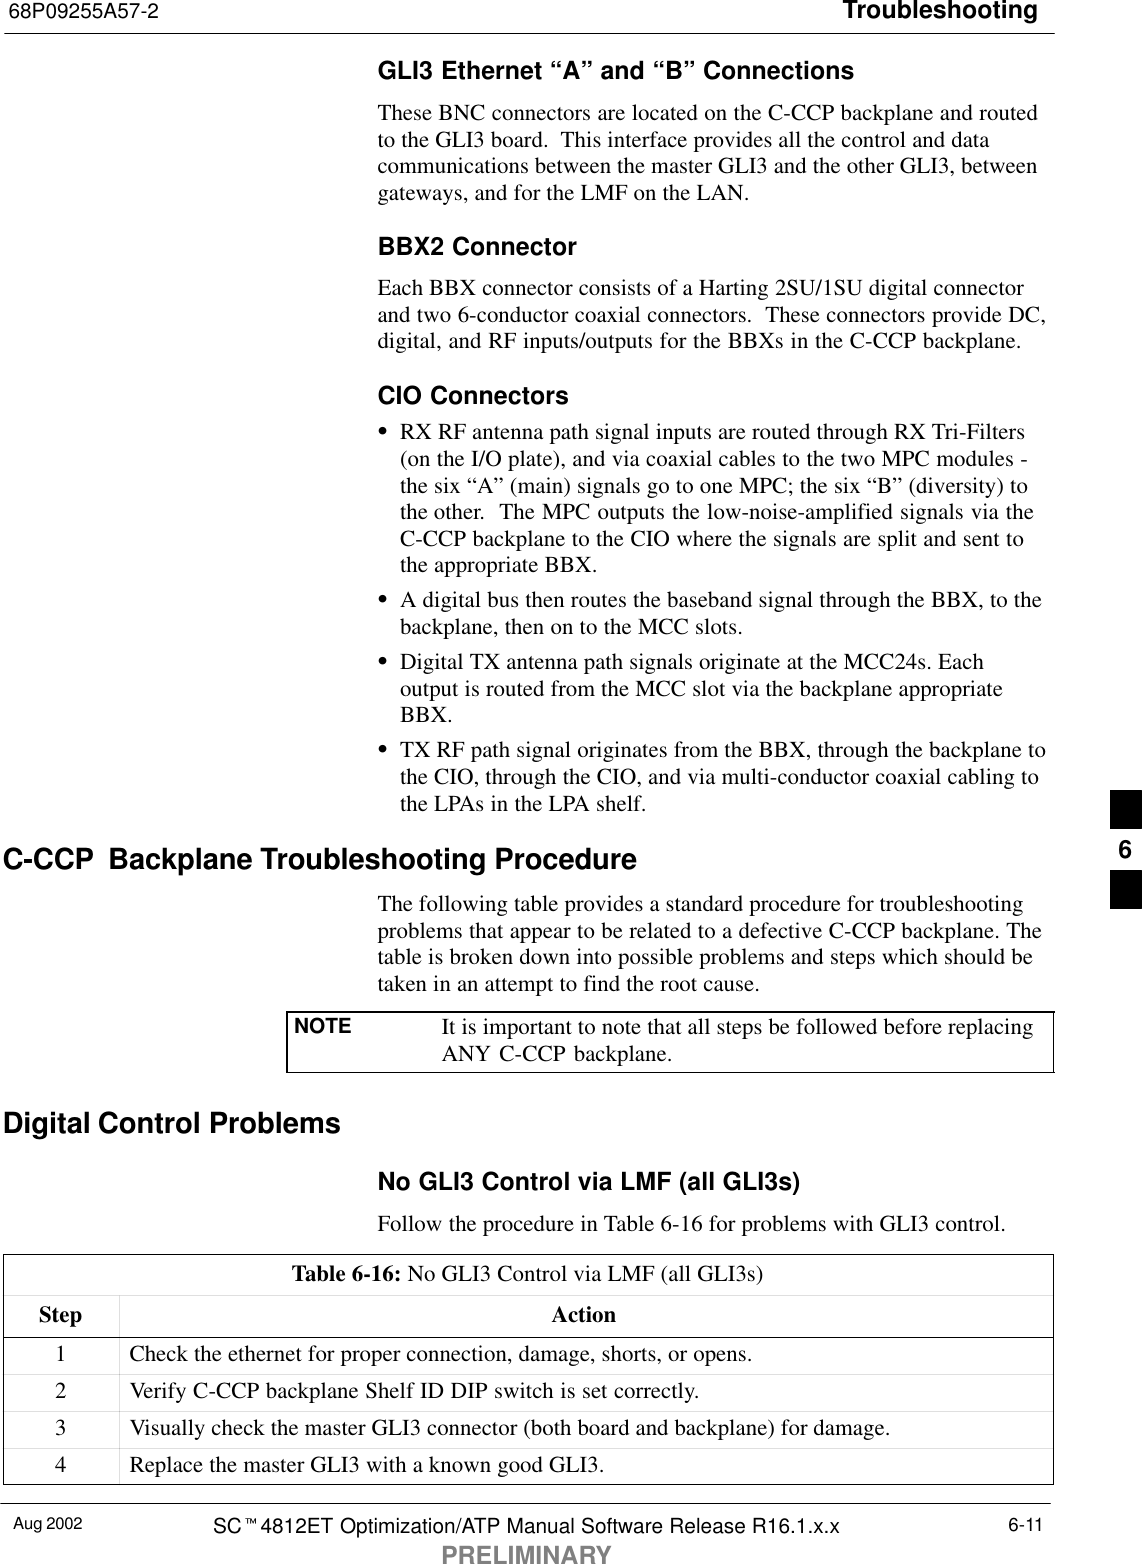 Troubleshooting68P09255A57-2Aug 2002 SCt4812ET Optimization/ATP Manual Software Release R16.1.x.xPRELIMINARY6-11GLI3 Ethernet “A” and “B” ConnectionsThese BNC connectors are located on the C-CCP backplane and routedto the GLI3 board.  This interface provides all the control and datacommunications between the master GLI3 and the other GLI3, betweengateways, and for the LMF on the LAN.BBX2 ConnectorEach BBX connector consists of a Harting 2SU/1SU digital connectorand two 6-conductor coaxial connectors.  These connectors provide DC,digital, and RF inputs/outputs for the BBXs in the C-CCP backplane.CIO ConnectorsSRX RF antenna path signal inputs are routed through RX Tri-Filters(on the I/O plate), and via coaxial cables to the two MPC modules -the six “A” (main) signals go to one MPC; the six “B” (diversity) tothe other.  The MPC outputs the low-noise-amplified signals via theC-CCP backplane to the CIO where the signals are split and sent tothe appropriate BBX.SA digital bus then routes the baseband signal through the BBX, to thebackplane, then on to the MCC slots.SDigital TX antenna path signals originate at the MCC24s. Eachoutput is routed from the MCC slot via the backplane appropriateBBX.STX RF path signal originates from the BBX, through the backplane tothe CIO, through the CIO, and via multi-conductor coaxial cabling tothe LPAs in the LPA shelf.C-CCP  Backplane Troubleshooting ProcedureThe following table provides a standard procedure for troubleshootingproblems that appear to be related to a defective C-CCP backplane. Thetable is broken down into possible problems and steps which should betaken in an attempt to find the root cause.NOTE It is important to note that all steps be followed before replacingANY C-CCP backplane.Digital Control ProblemsNo GLI3 Control via LMF (all GLI3s)Follow the procedure in Table 6-16 for problems with GLI3 control.Table 6-16: No GLI3 Control via LMF (all GLI3s)Step Action1Check the ethernet for proper connection, damage, shorts, or opens.2Verify C-CCP backplane Shelf ID DIP switch is set correctly.3Visually check the master GLI3 connector (both board and backplane) for damage.4Replace the master GLI3 with a known good GLI3.6